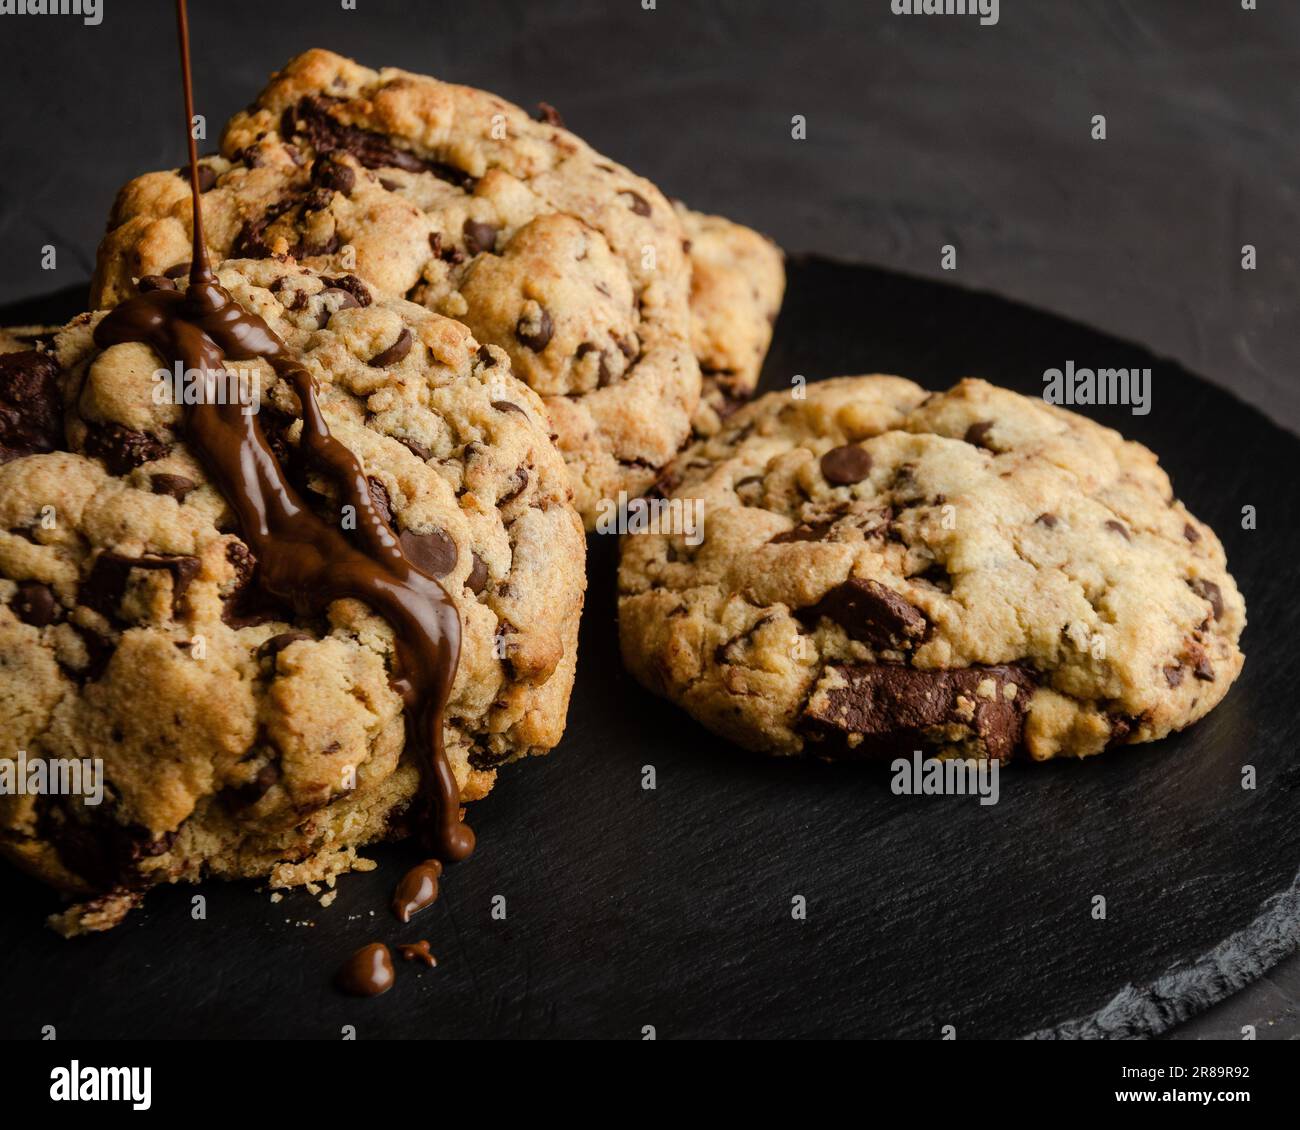 Chocolate chip cookies with chocolate syrup, on black background Stock Photo